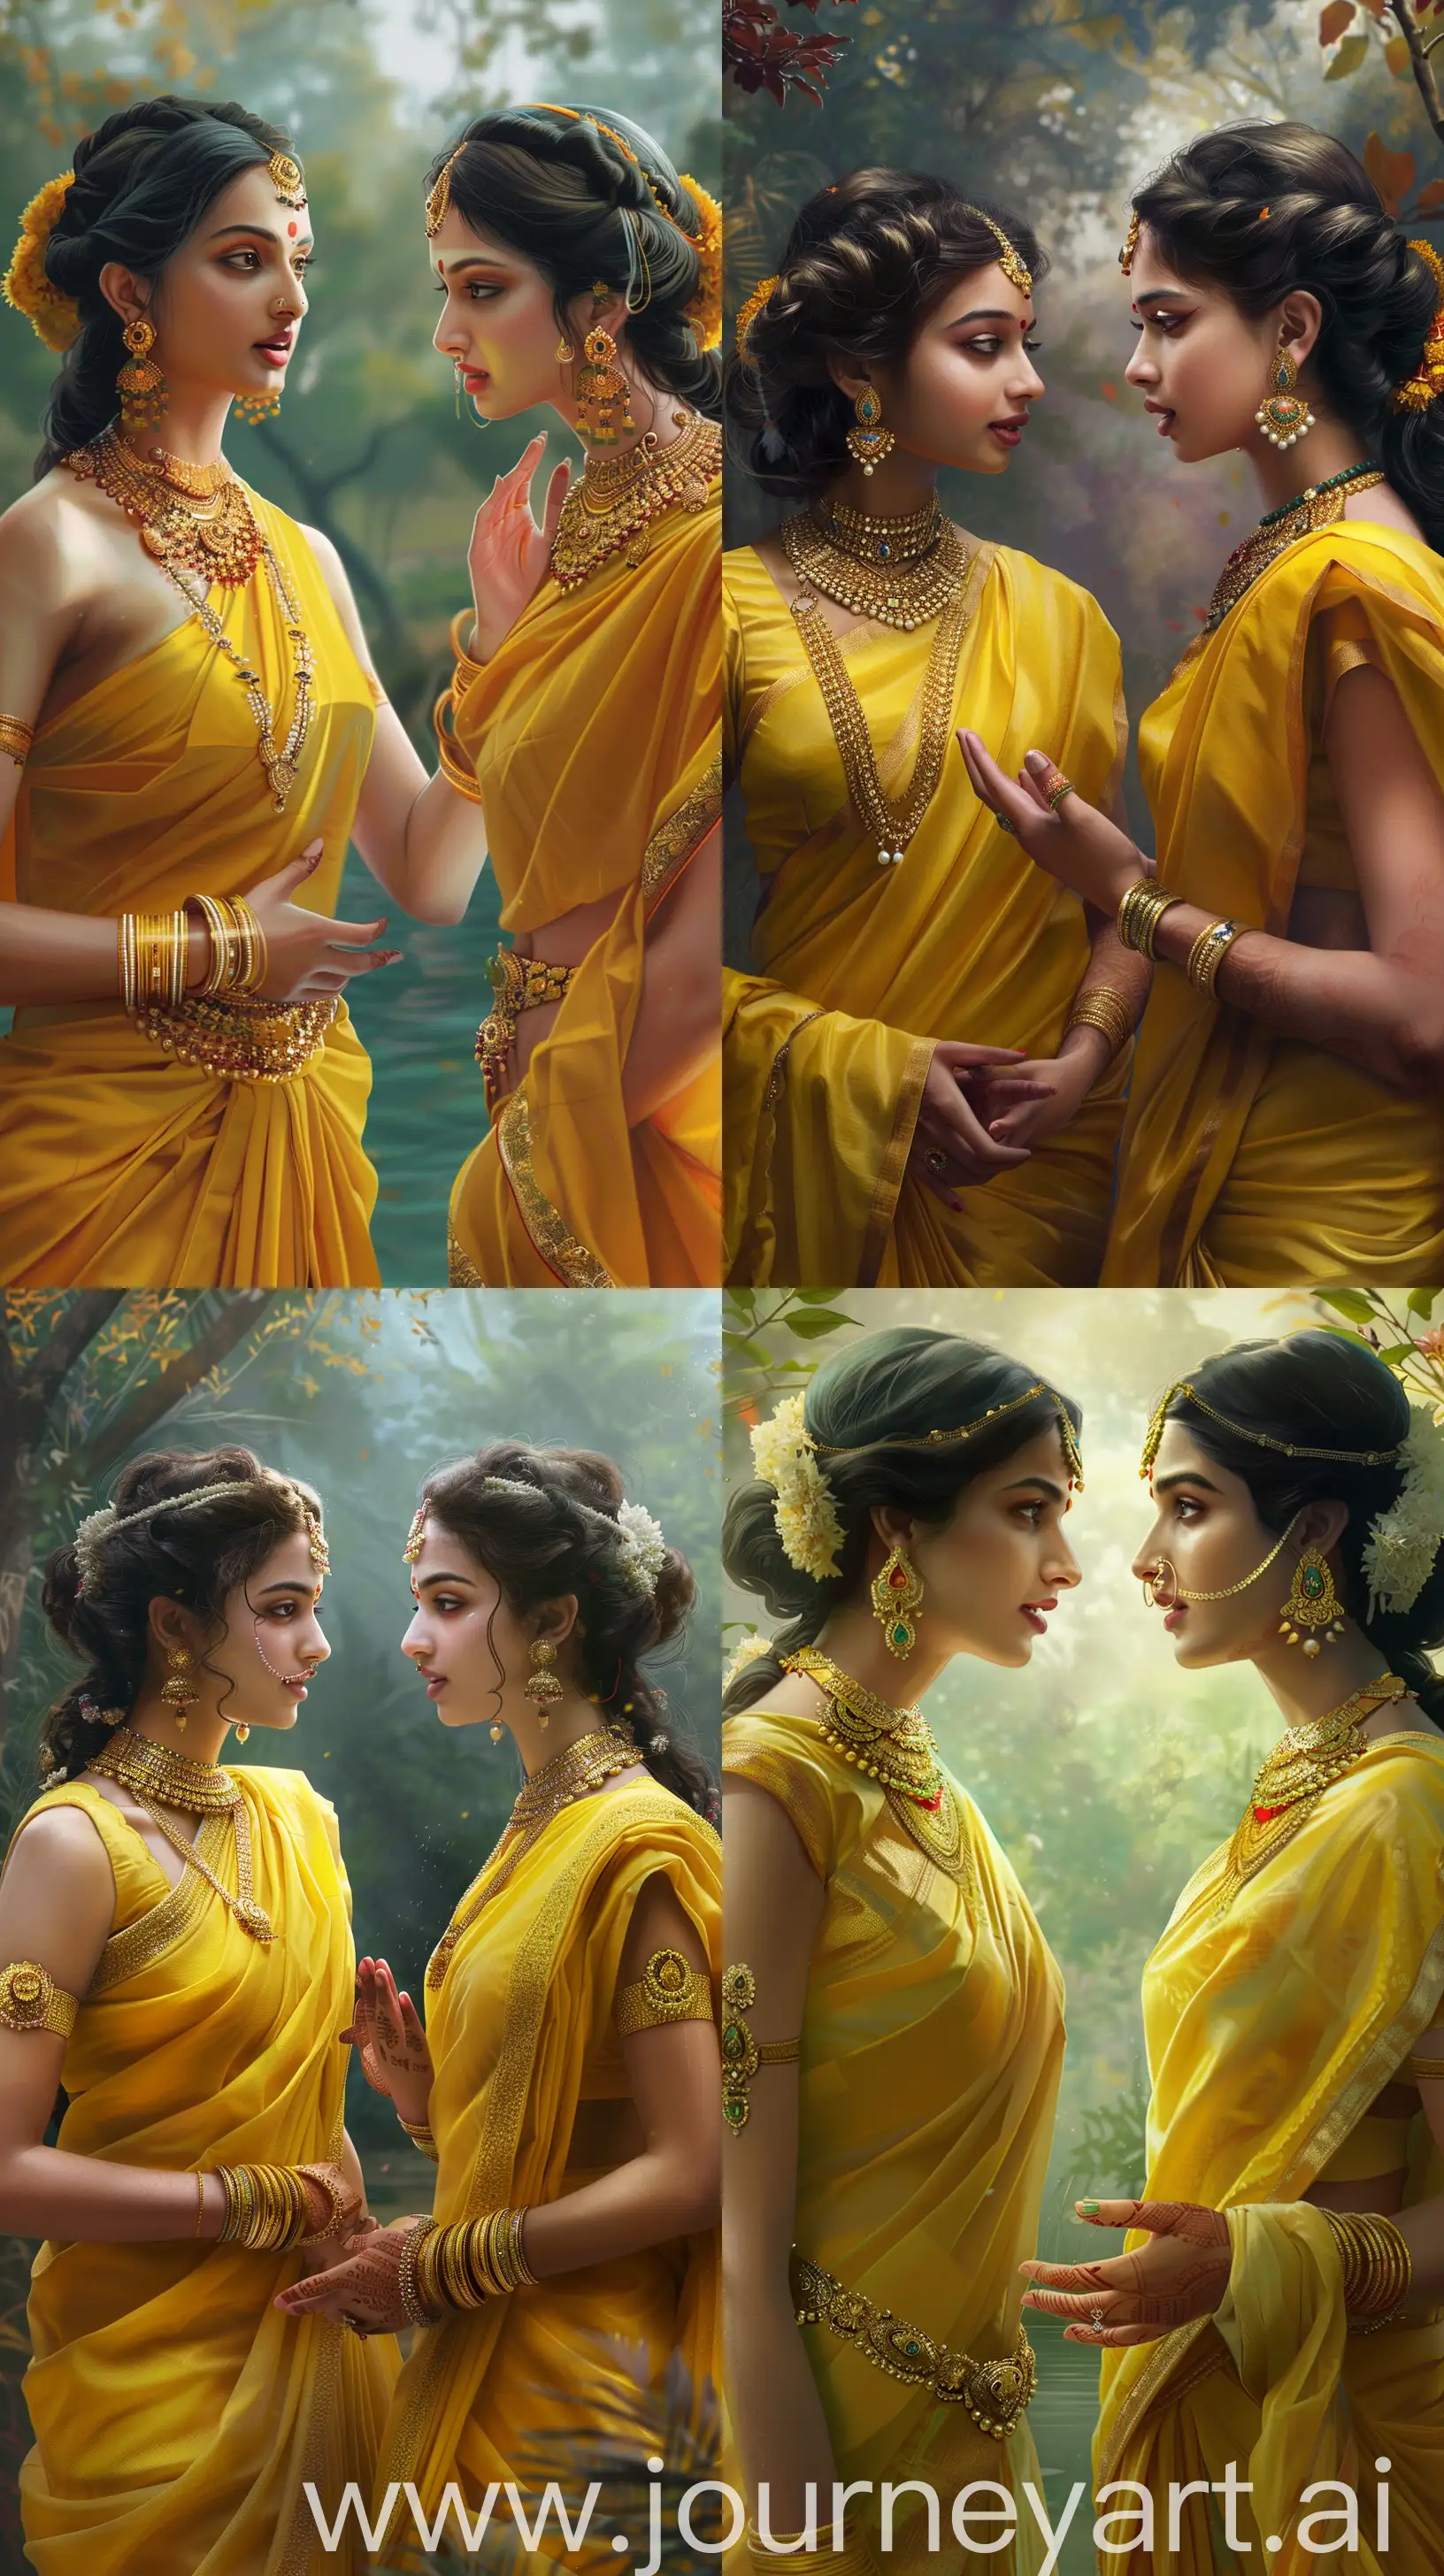 Realistic, colorful, two identical Indian women from ancient times dressed in yellow sarees facing each other, one woman speaking to the other, intricate jewelry details, serene tranquil background, 8k resolution --ar 9:16 